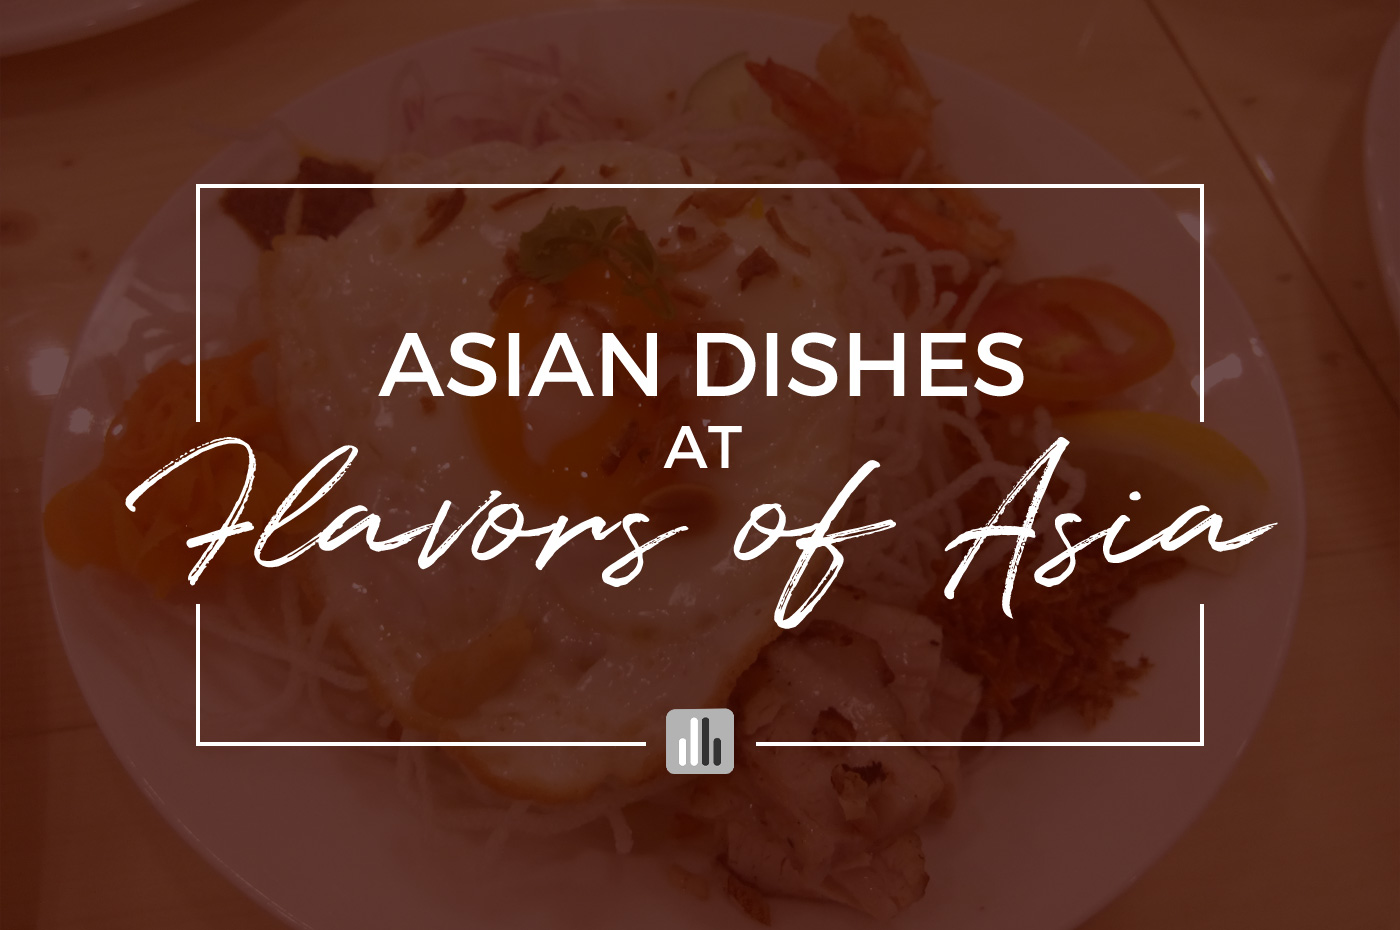 Flavors Of Asia Brings Different Regional Cuisines In One Location